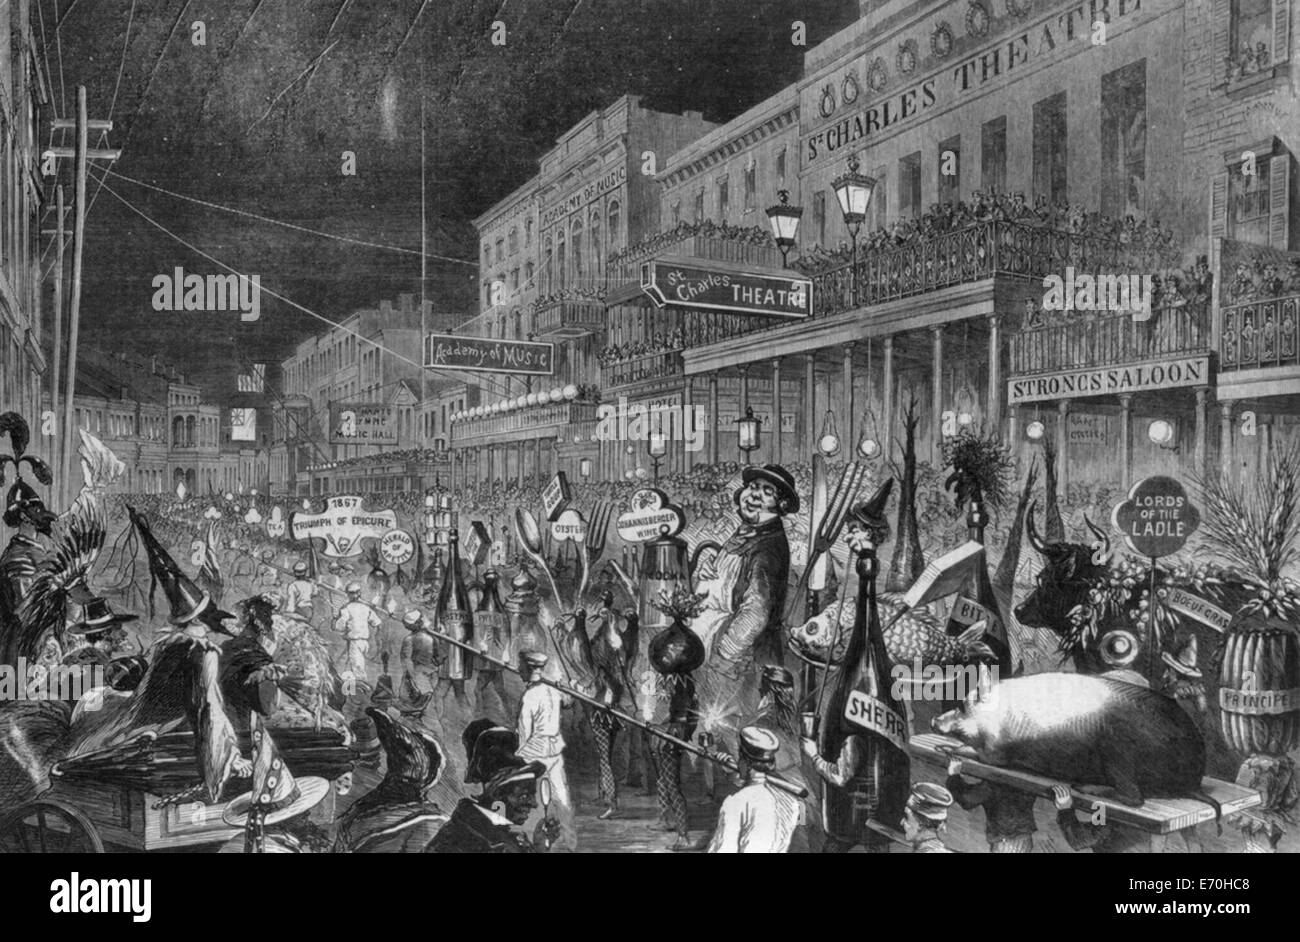 Mardi Gras Celebration in New Orleans, Tuesday March 6 - Procession of the Mistick Krewe of Comus   1867 Stock Photo